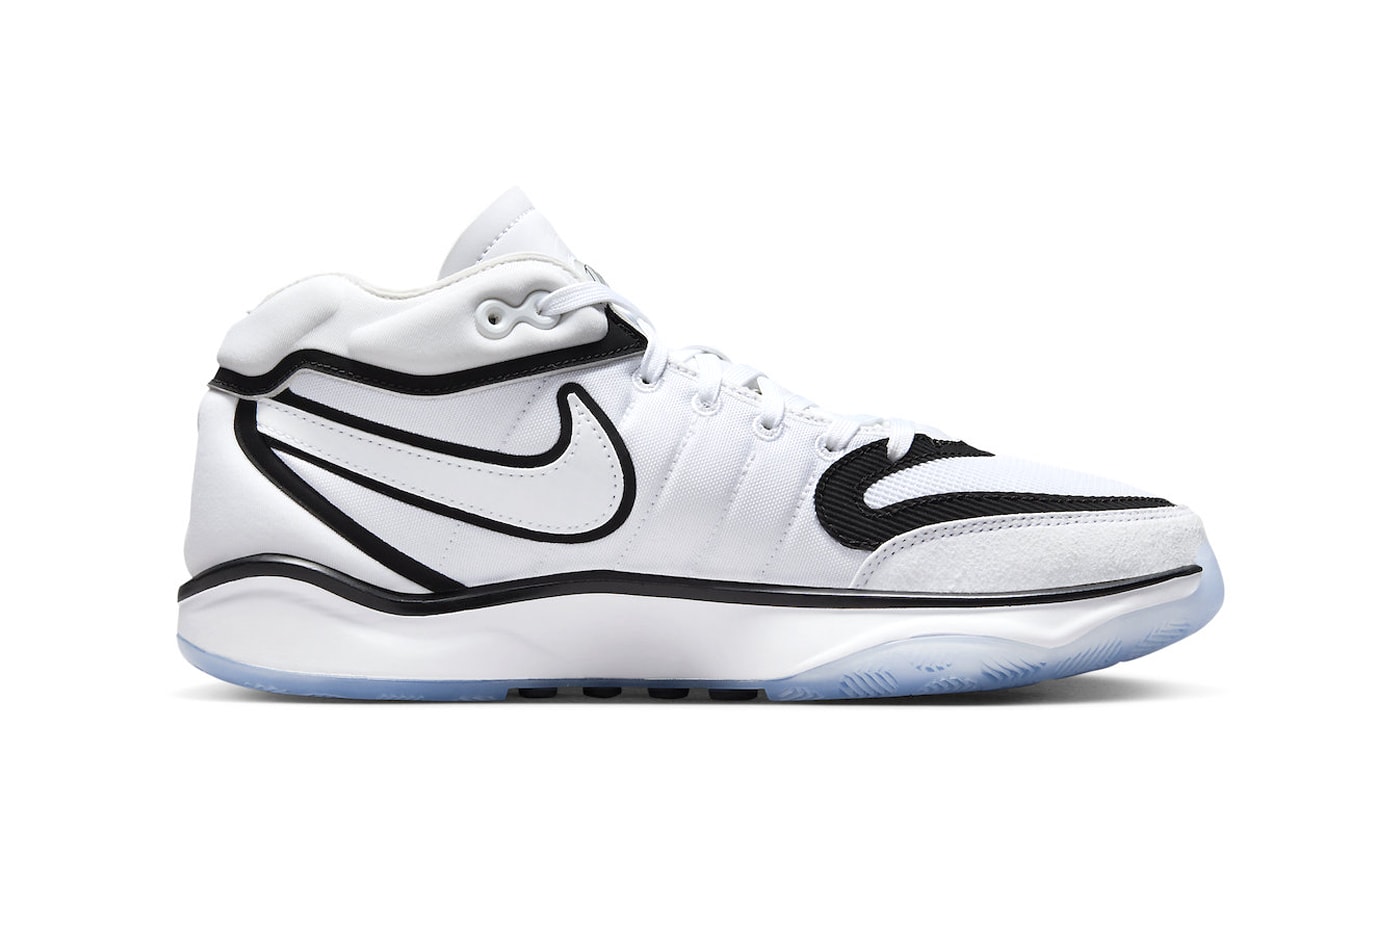 Nike Air Zoom GT Hustle 2 Surfaces in "White/Black" DJ9405-102 Release info regular everyday shoes swoosh court shoes